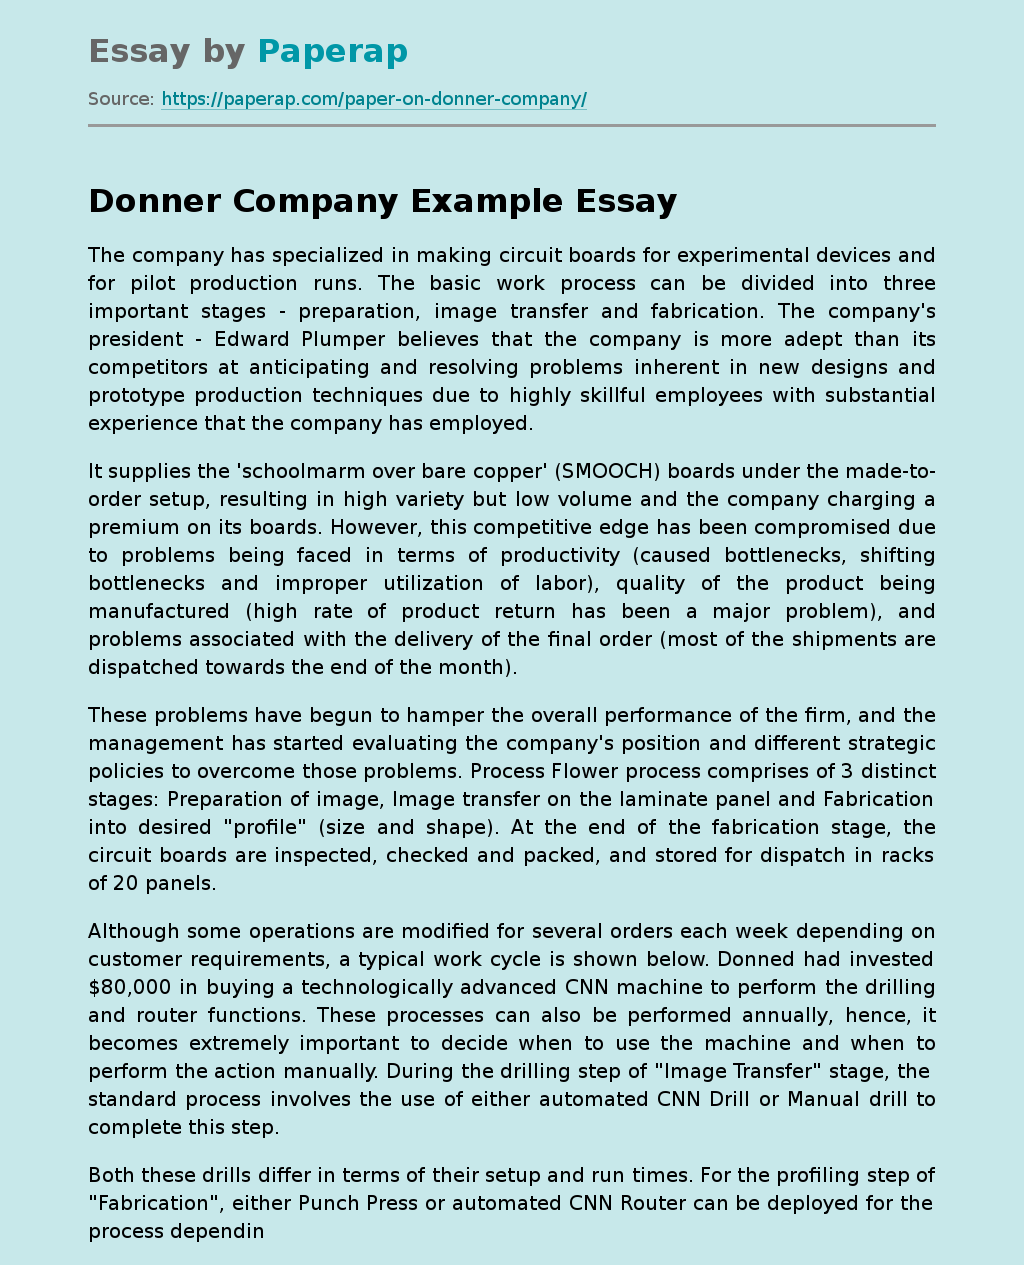 Donner Company Example